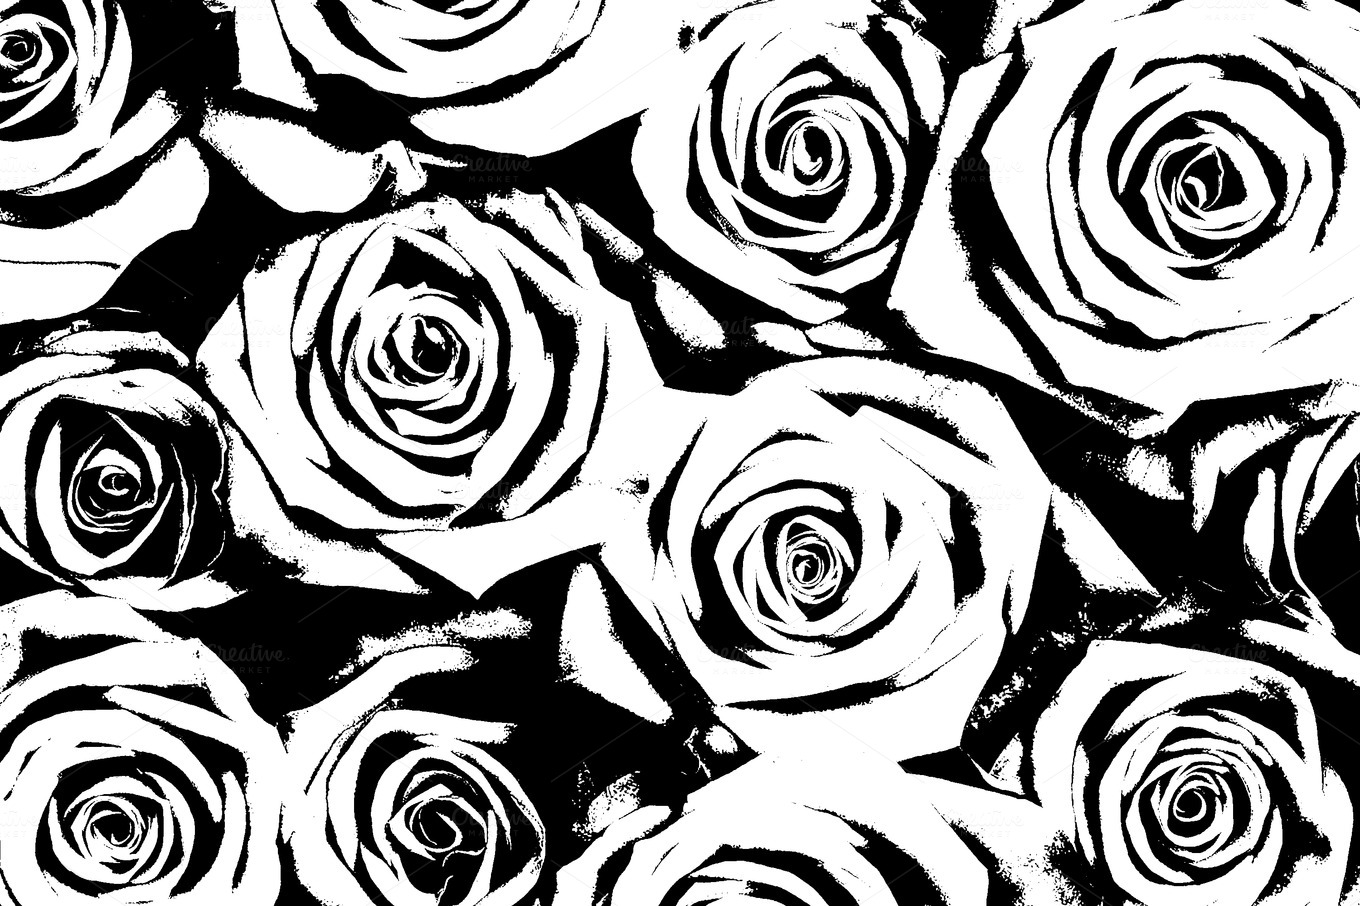 Rose Black and White Background ~ Abstract Photos on Creative Market